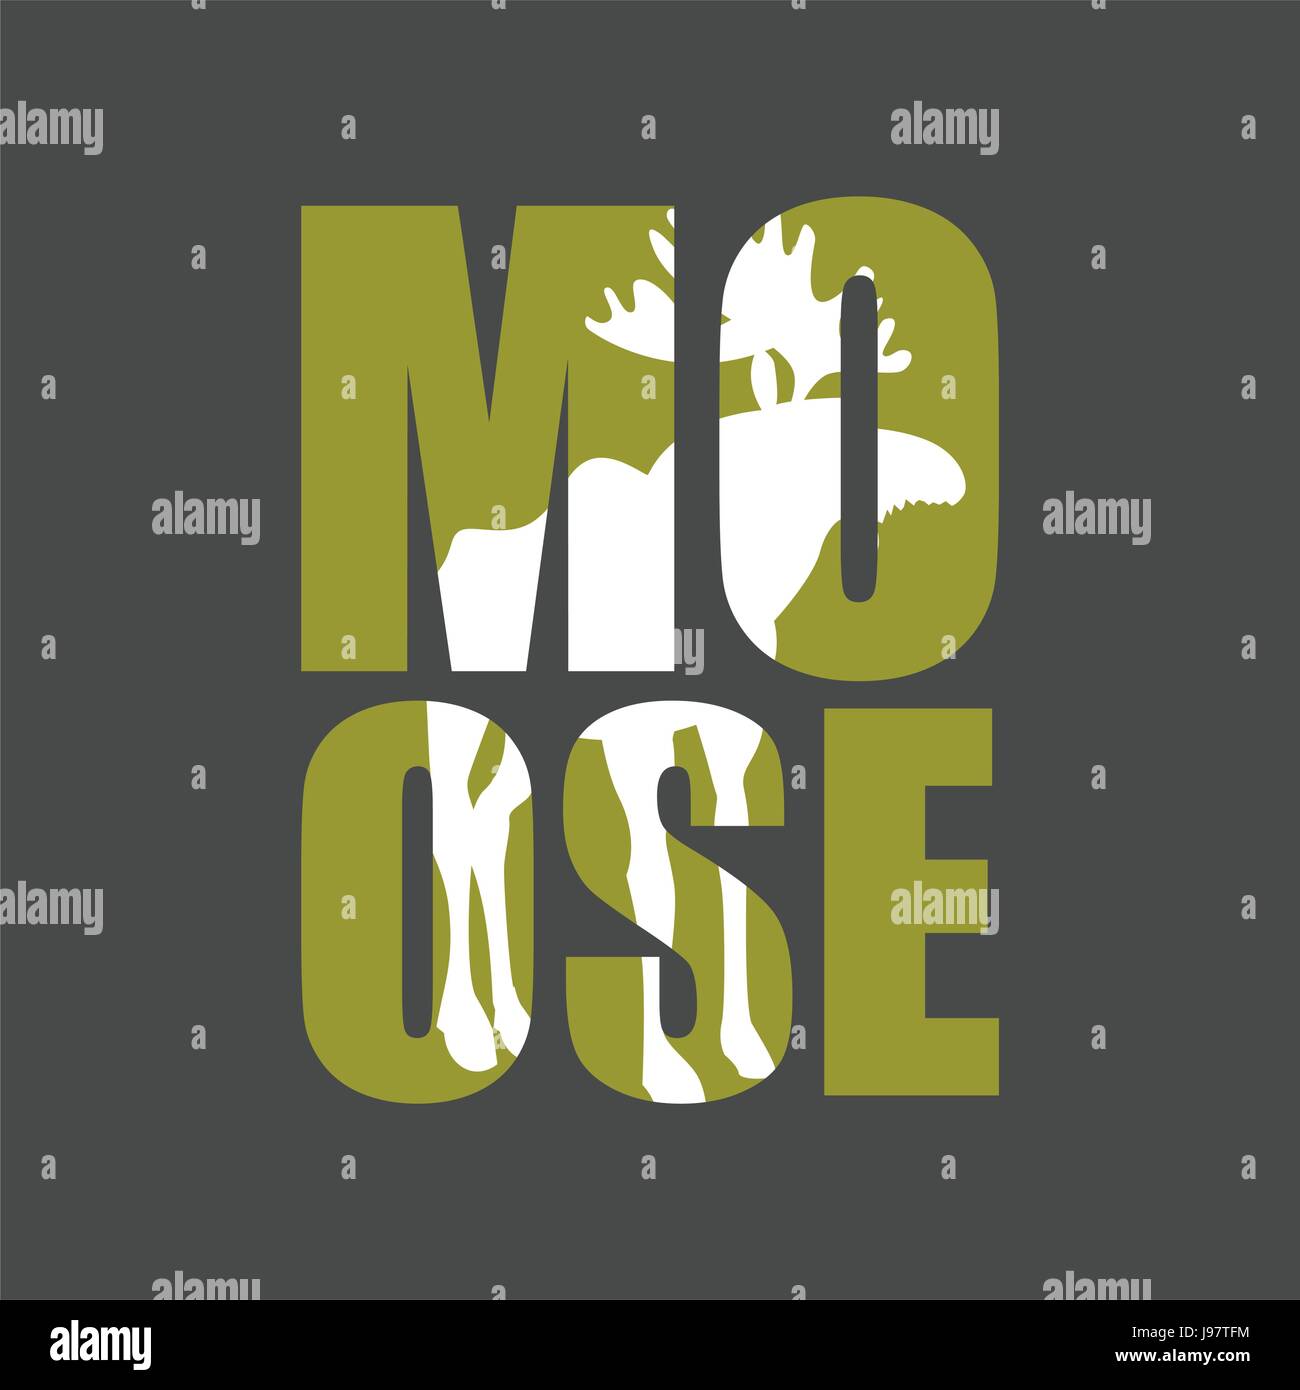 Moose. Wild animal silhouette text on a gray background. Stock Vector